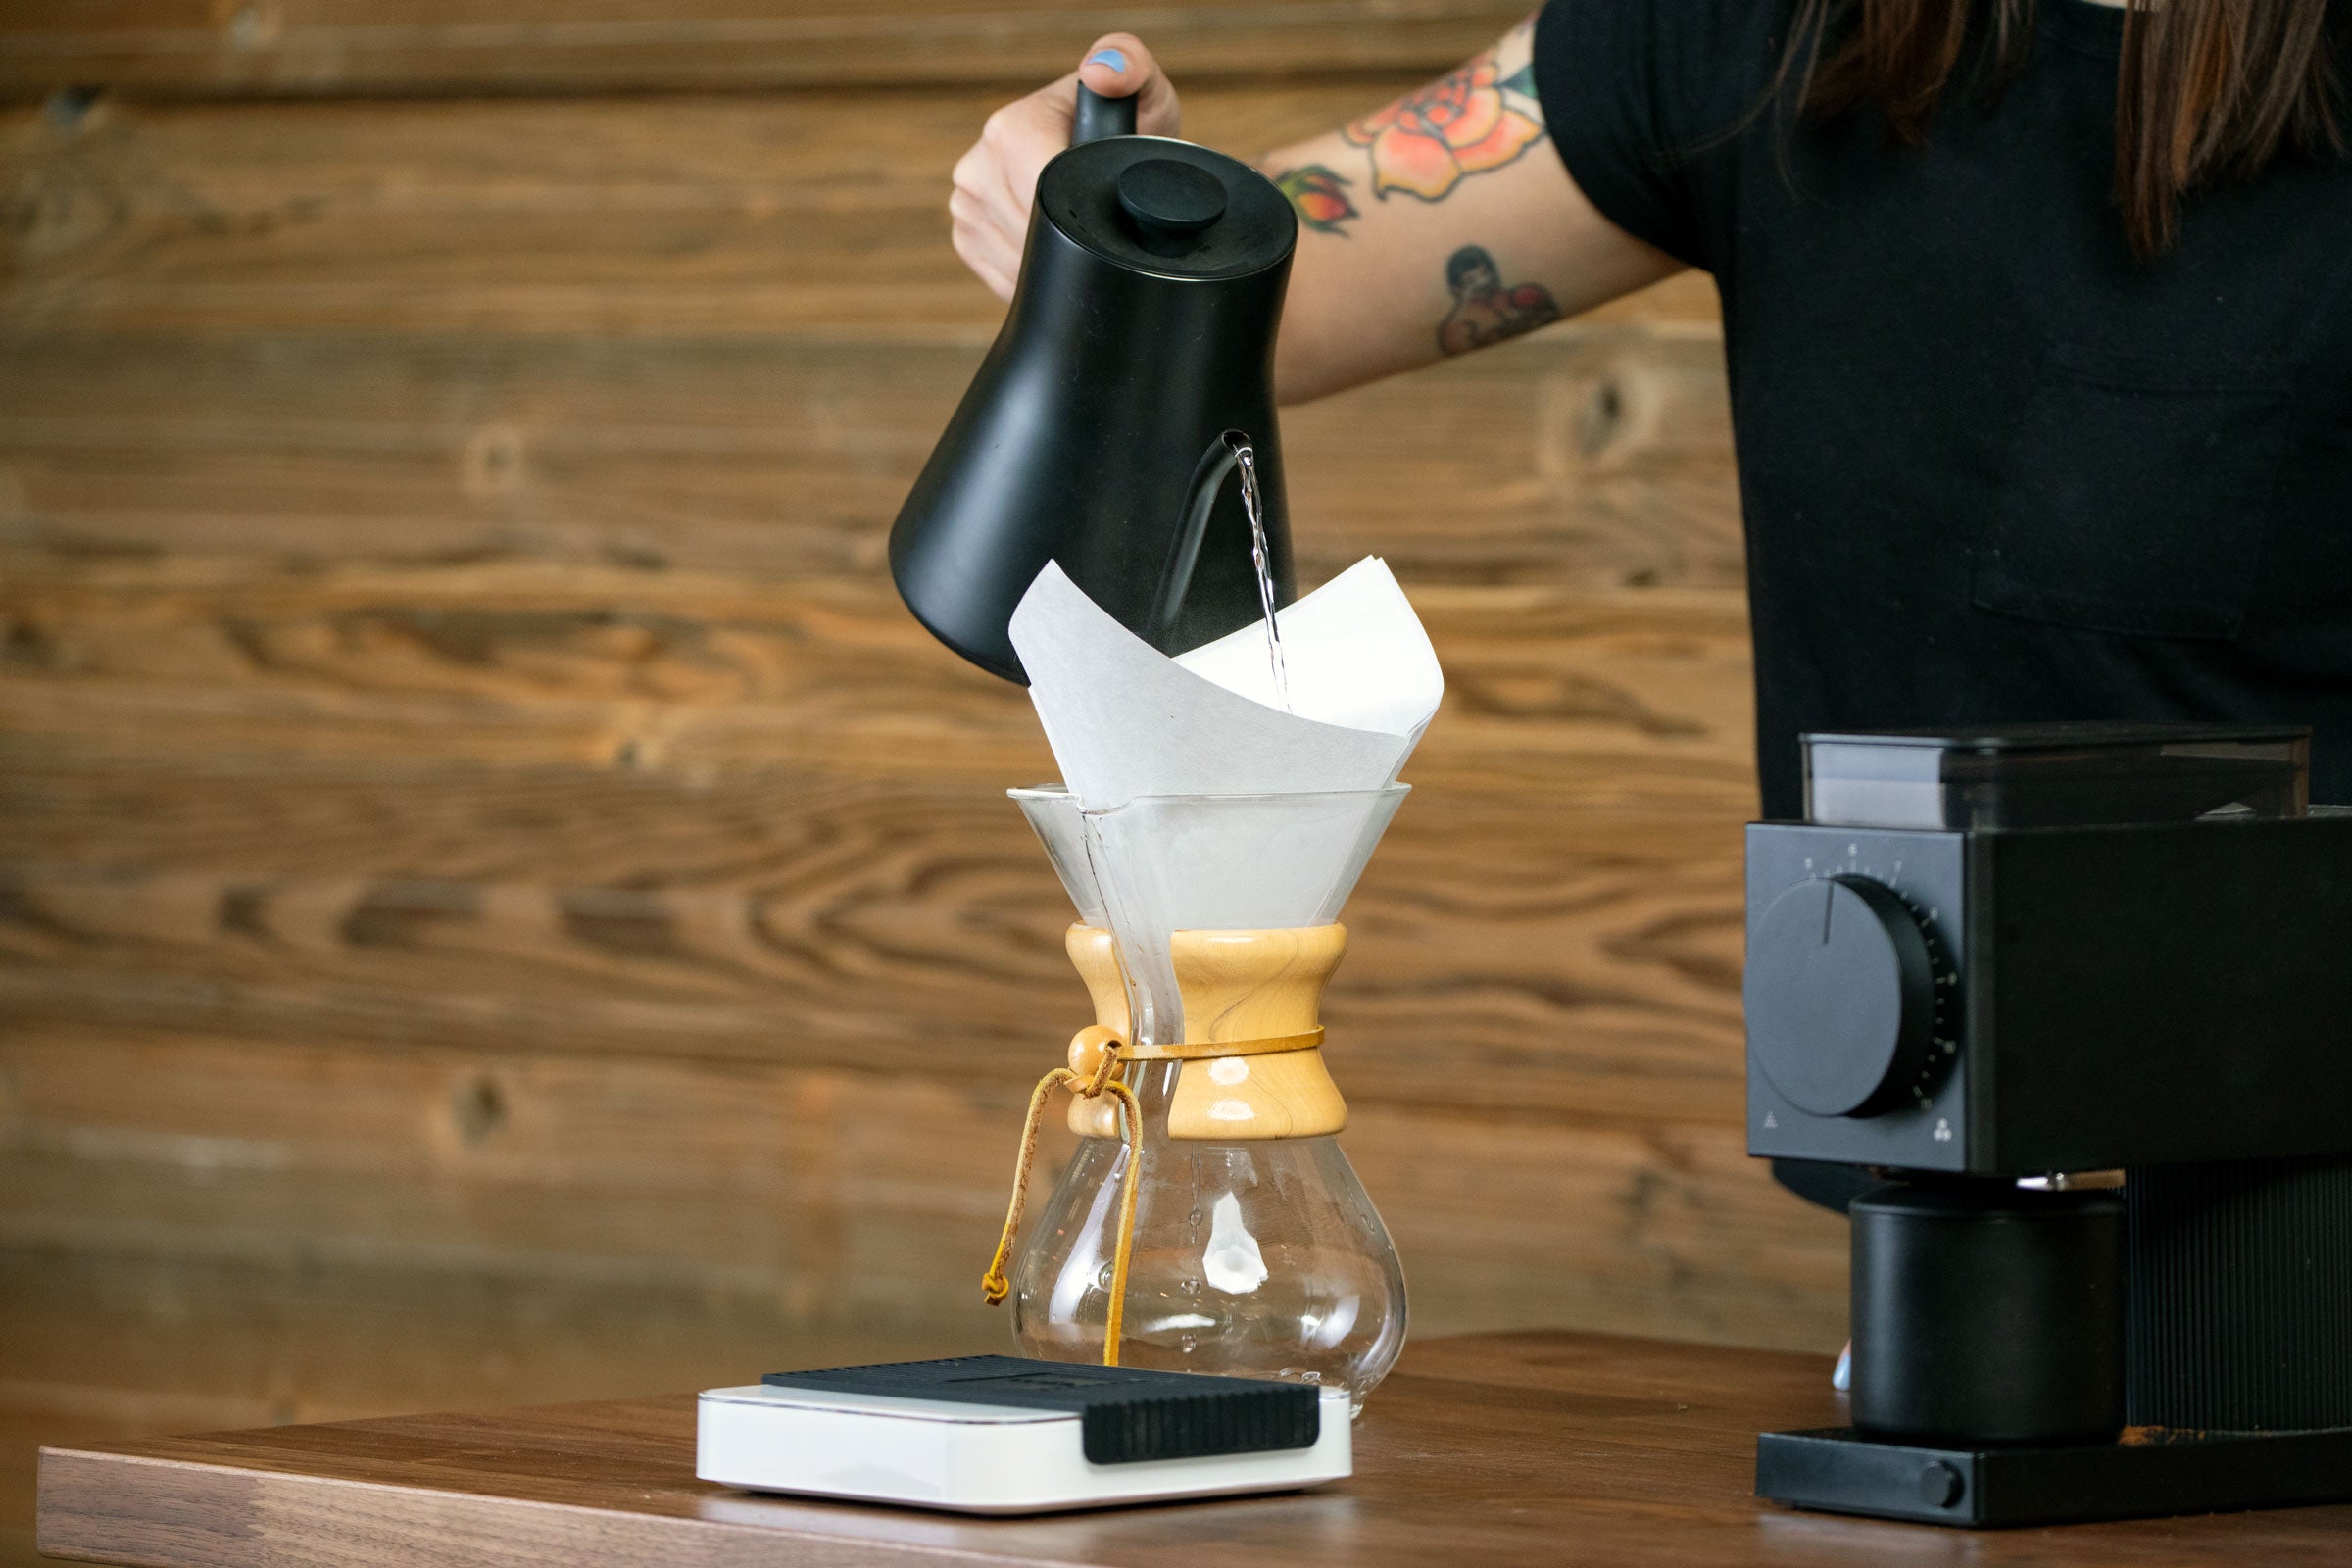 The best grind and brew coffee maker has thousands of positive